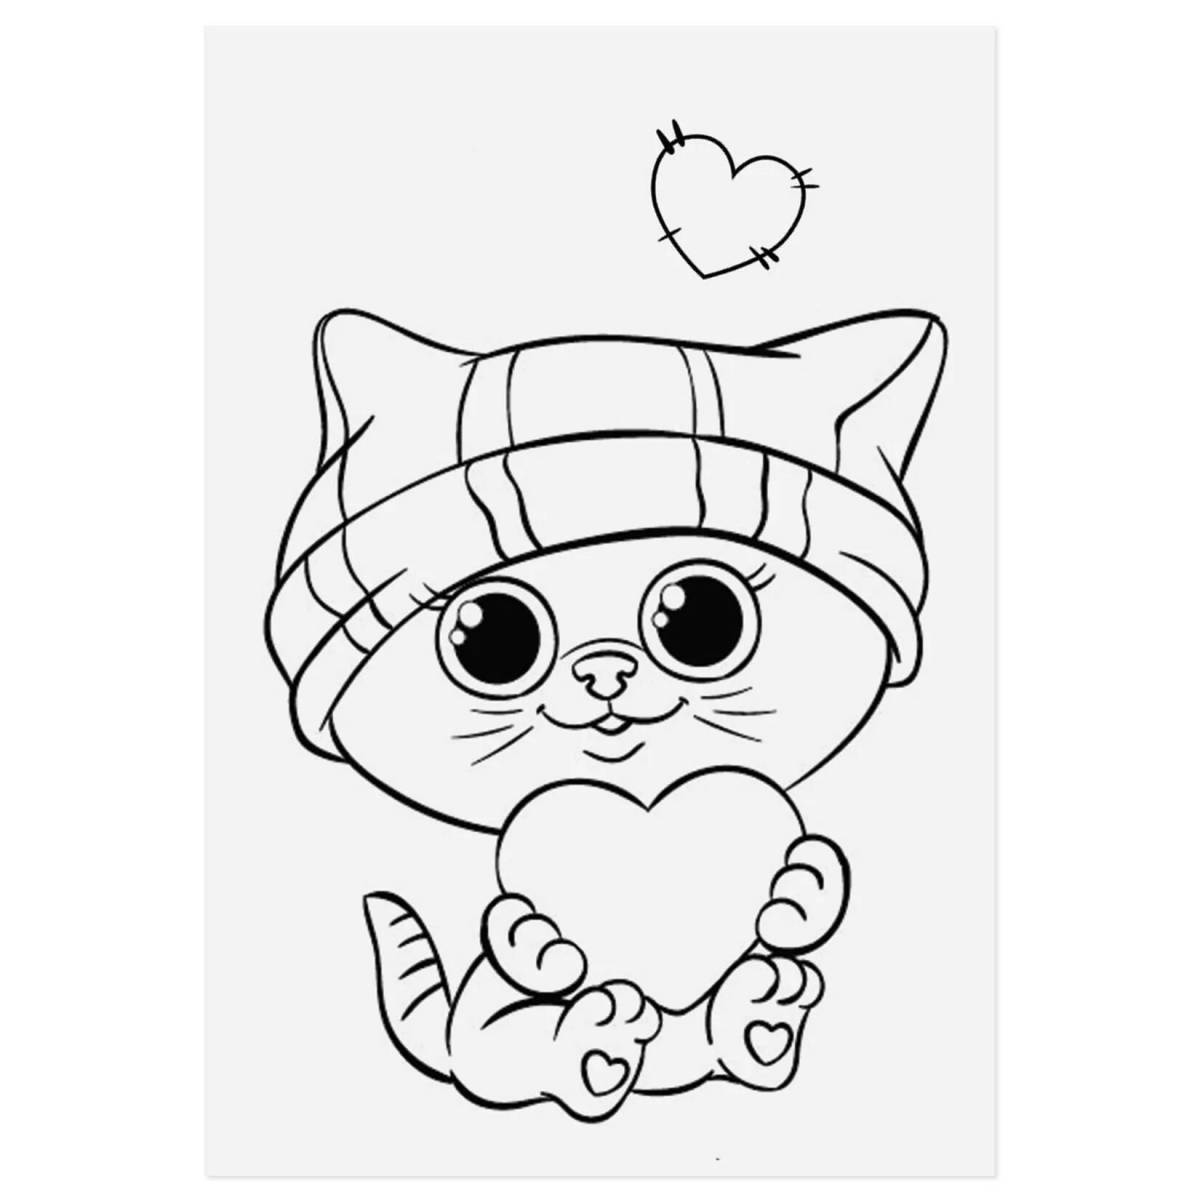 Naughty little cat coloring book